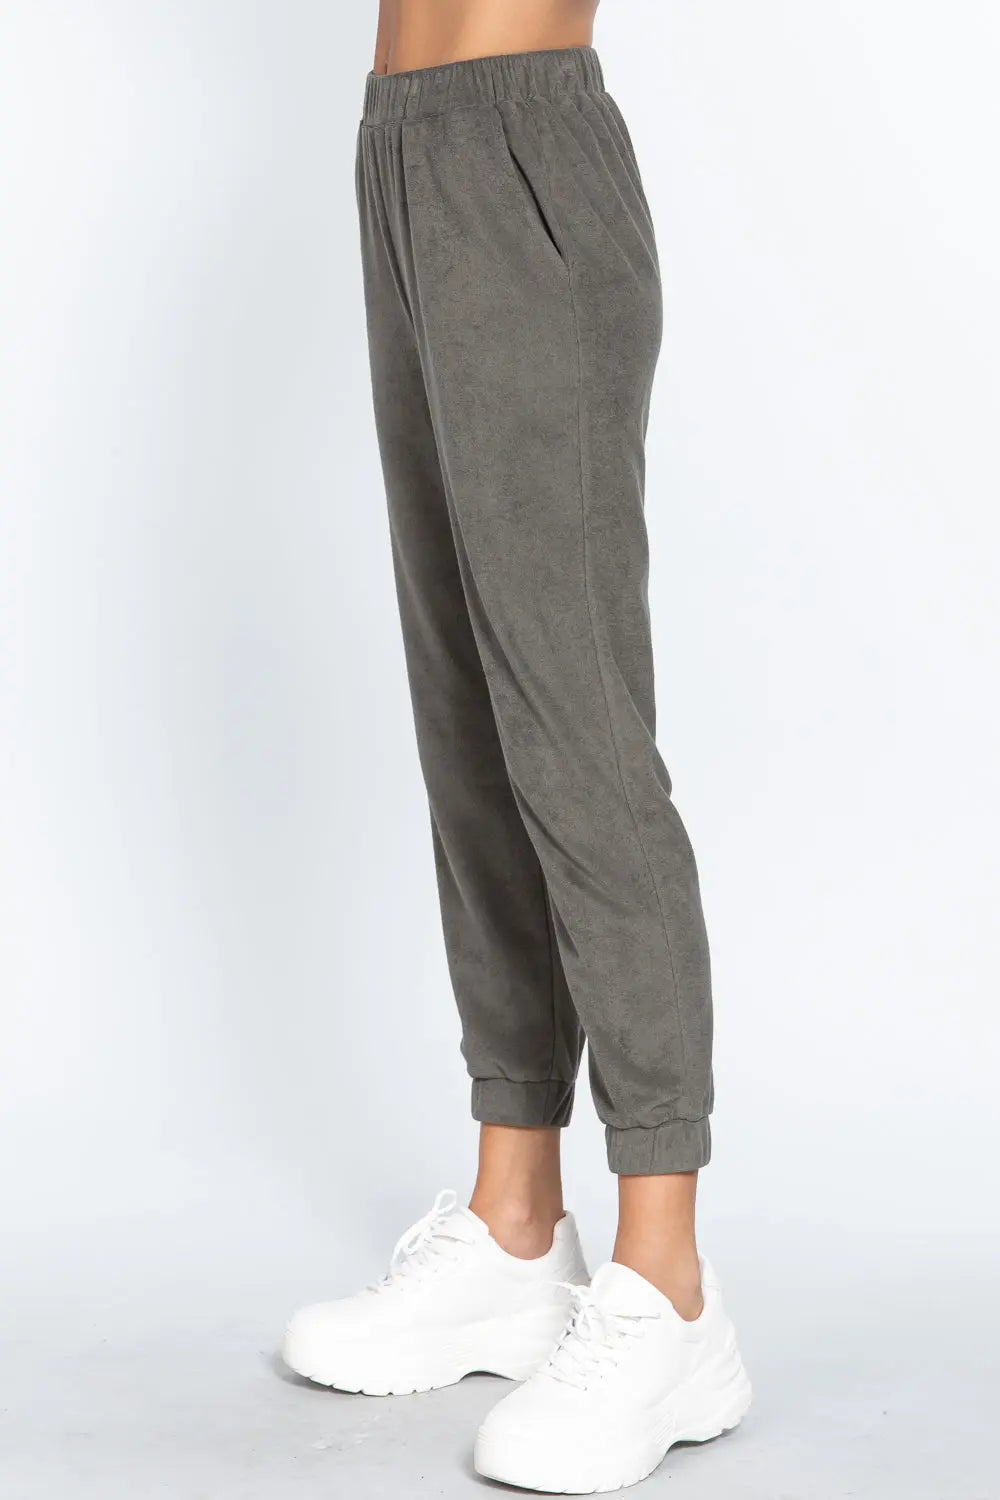 Terry Towelling Long Jogger Pants Sunny EvE Fashion